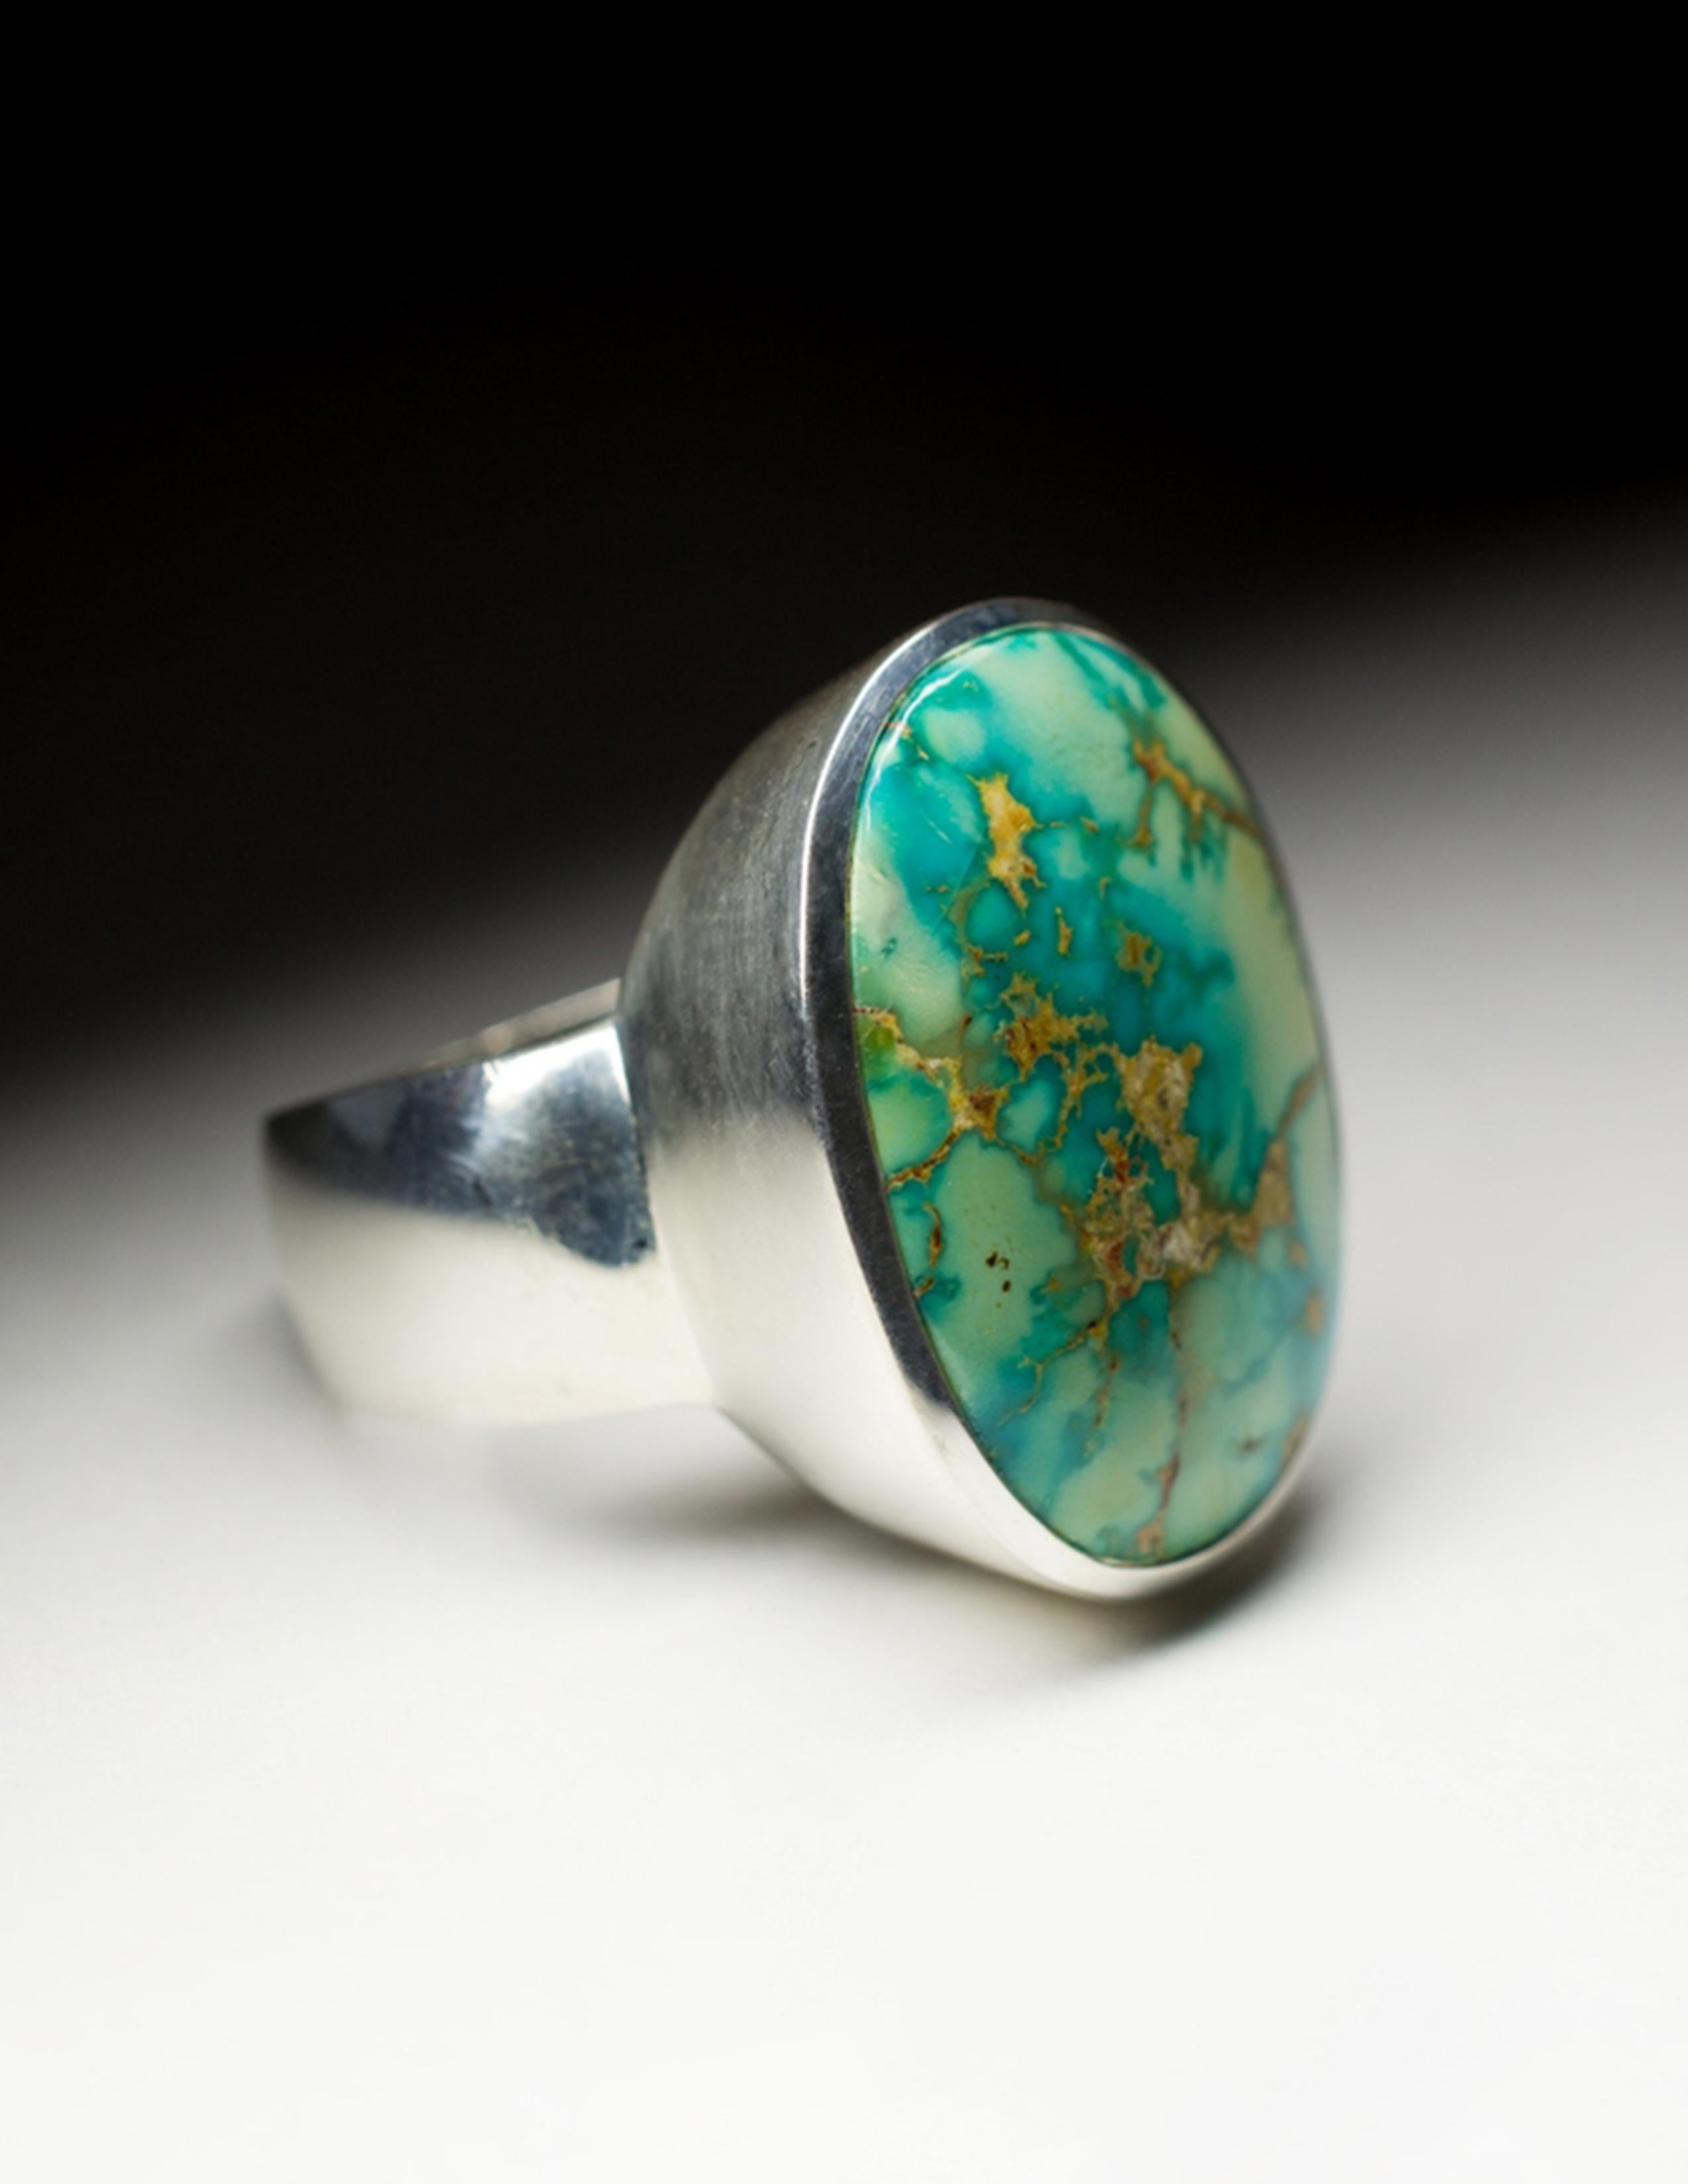 Large Turquoise Silver Ring Polychrome Seaweed Seafoam Green Color Natural Gem For Sale 1